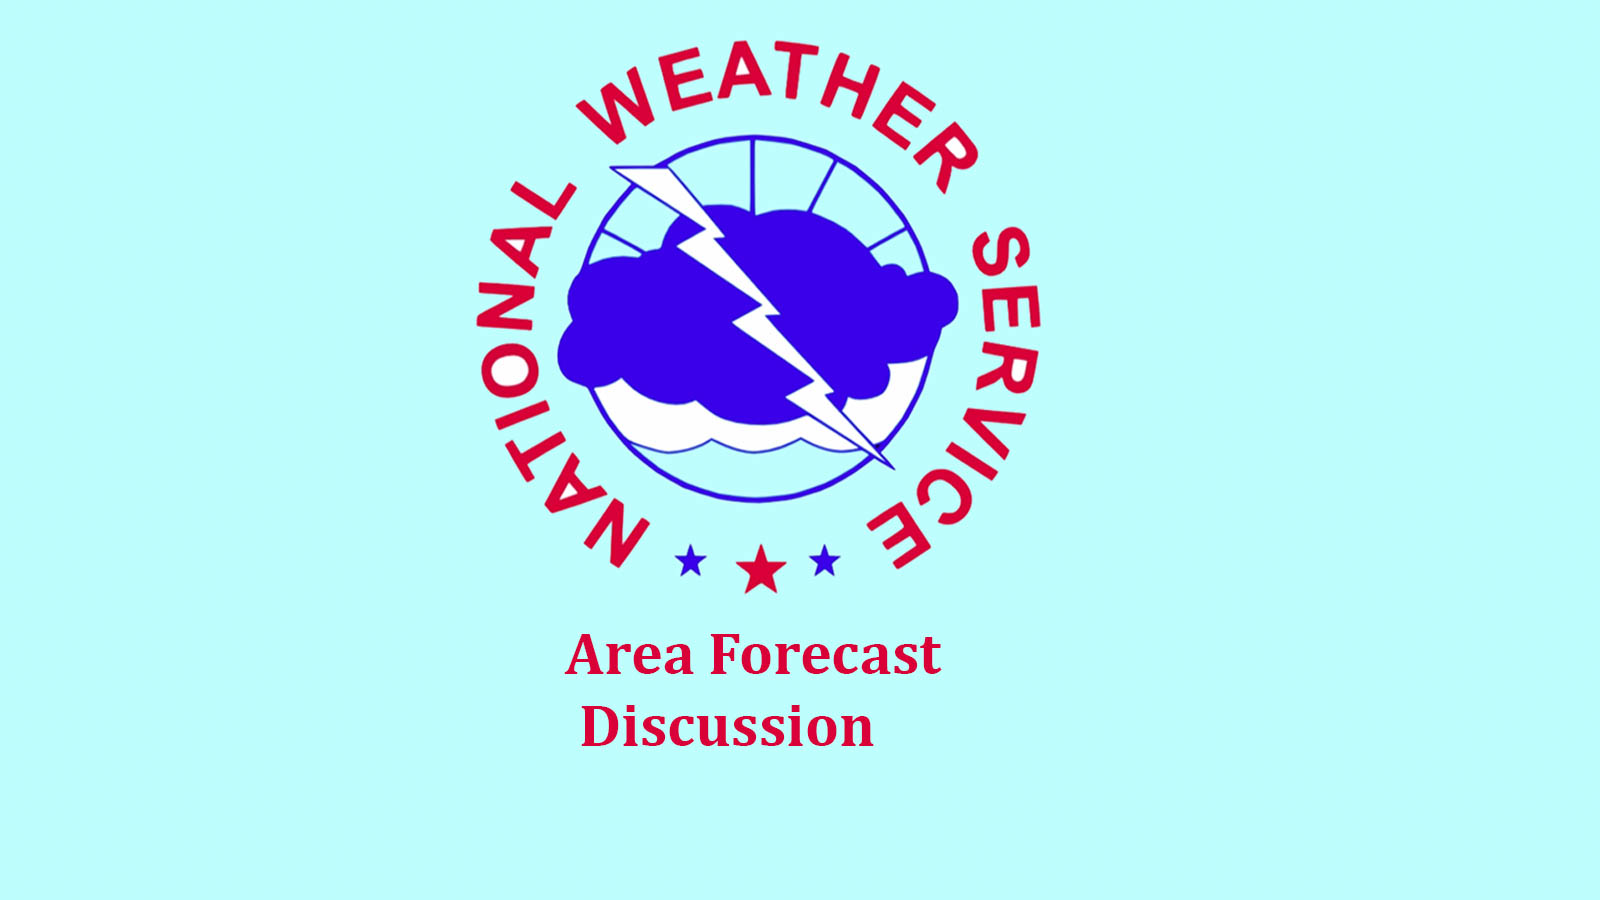 210212 US National Weather Service Area Discussion Logo - National Weather Service forecasts a "prolonged cold period" through Feb. 18